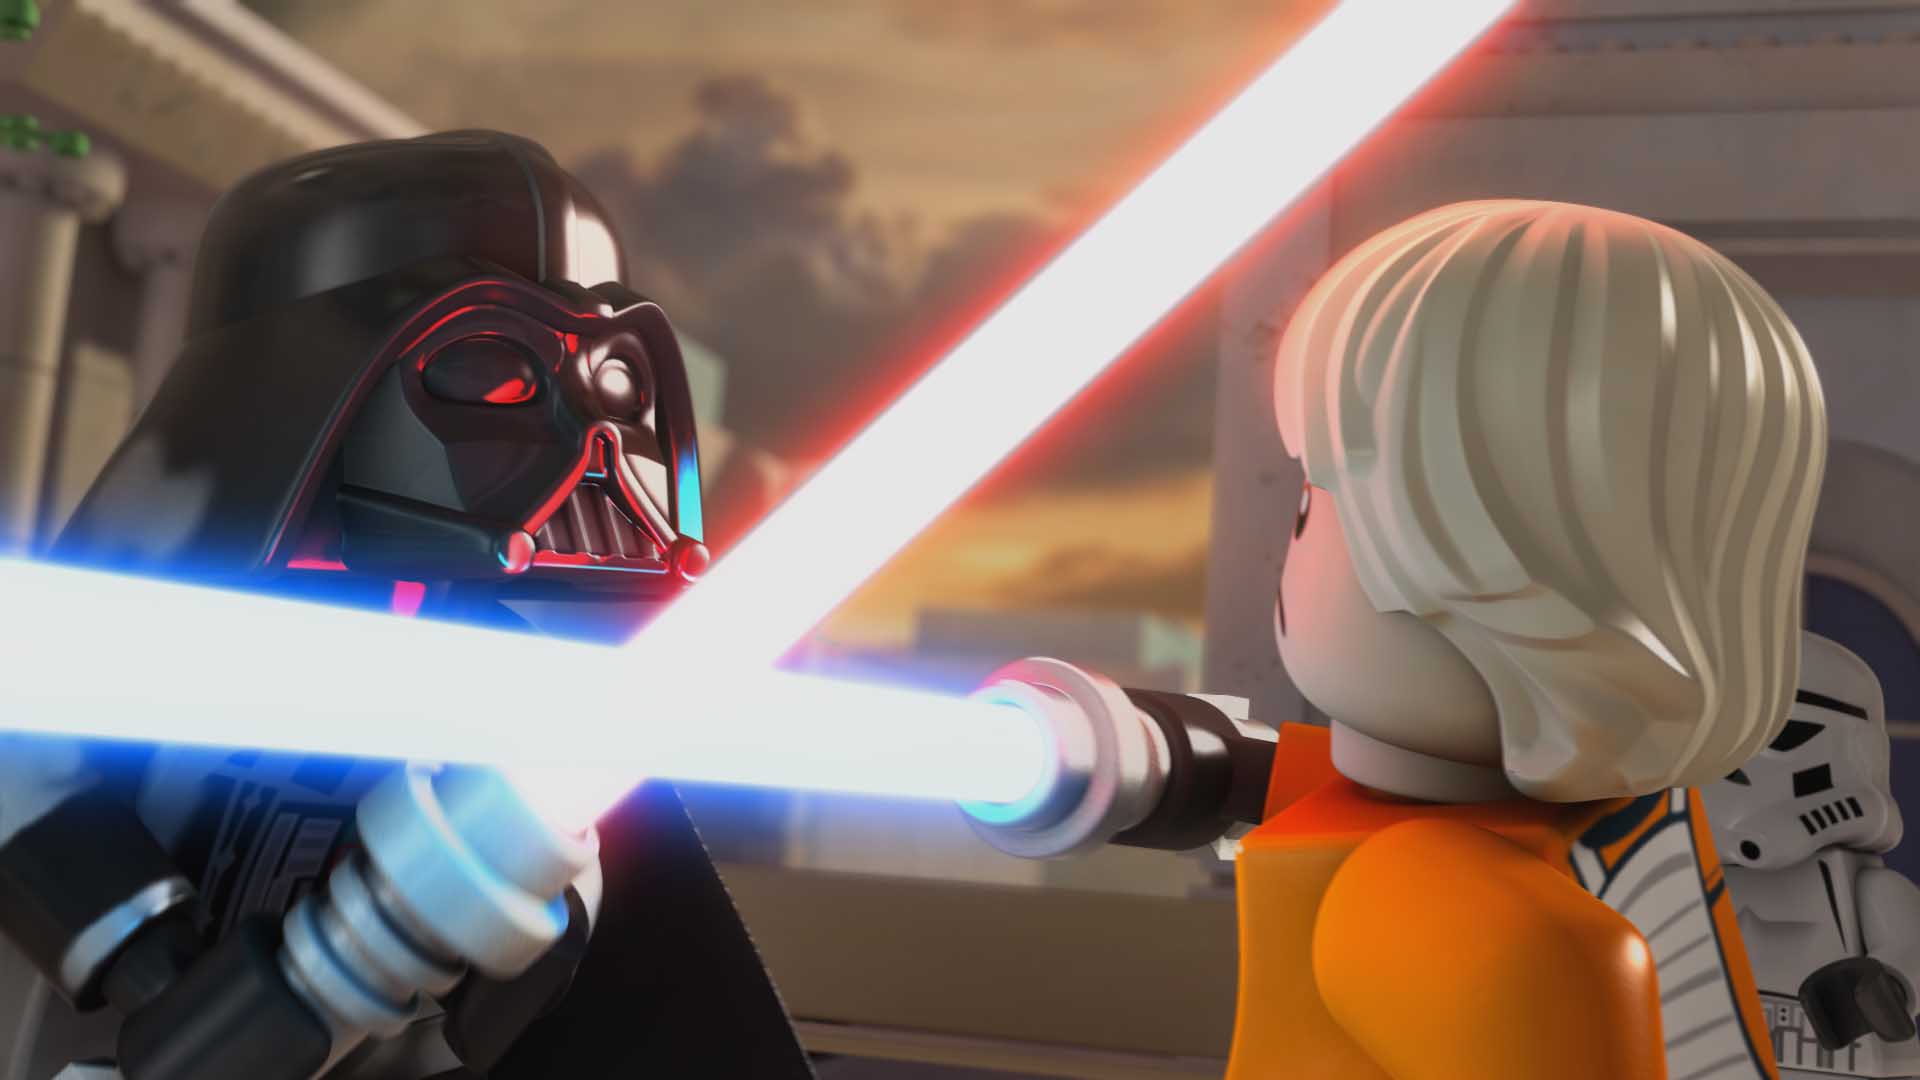 Lego Star Wars: The Empire Strikes Out Available on DVD